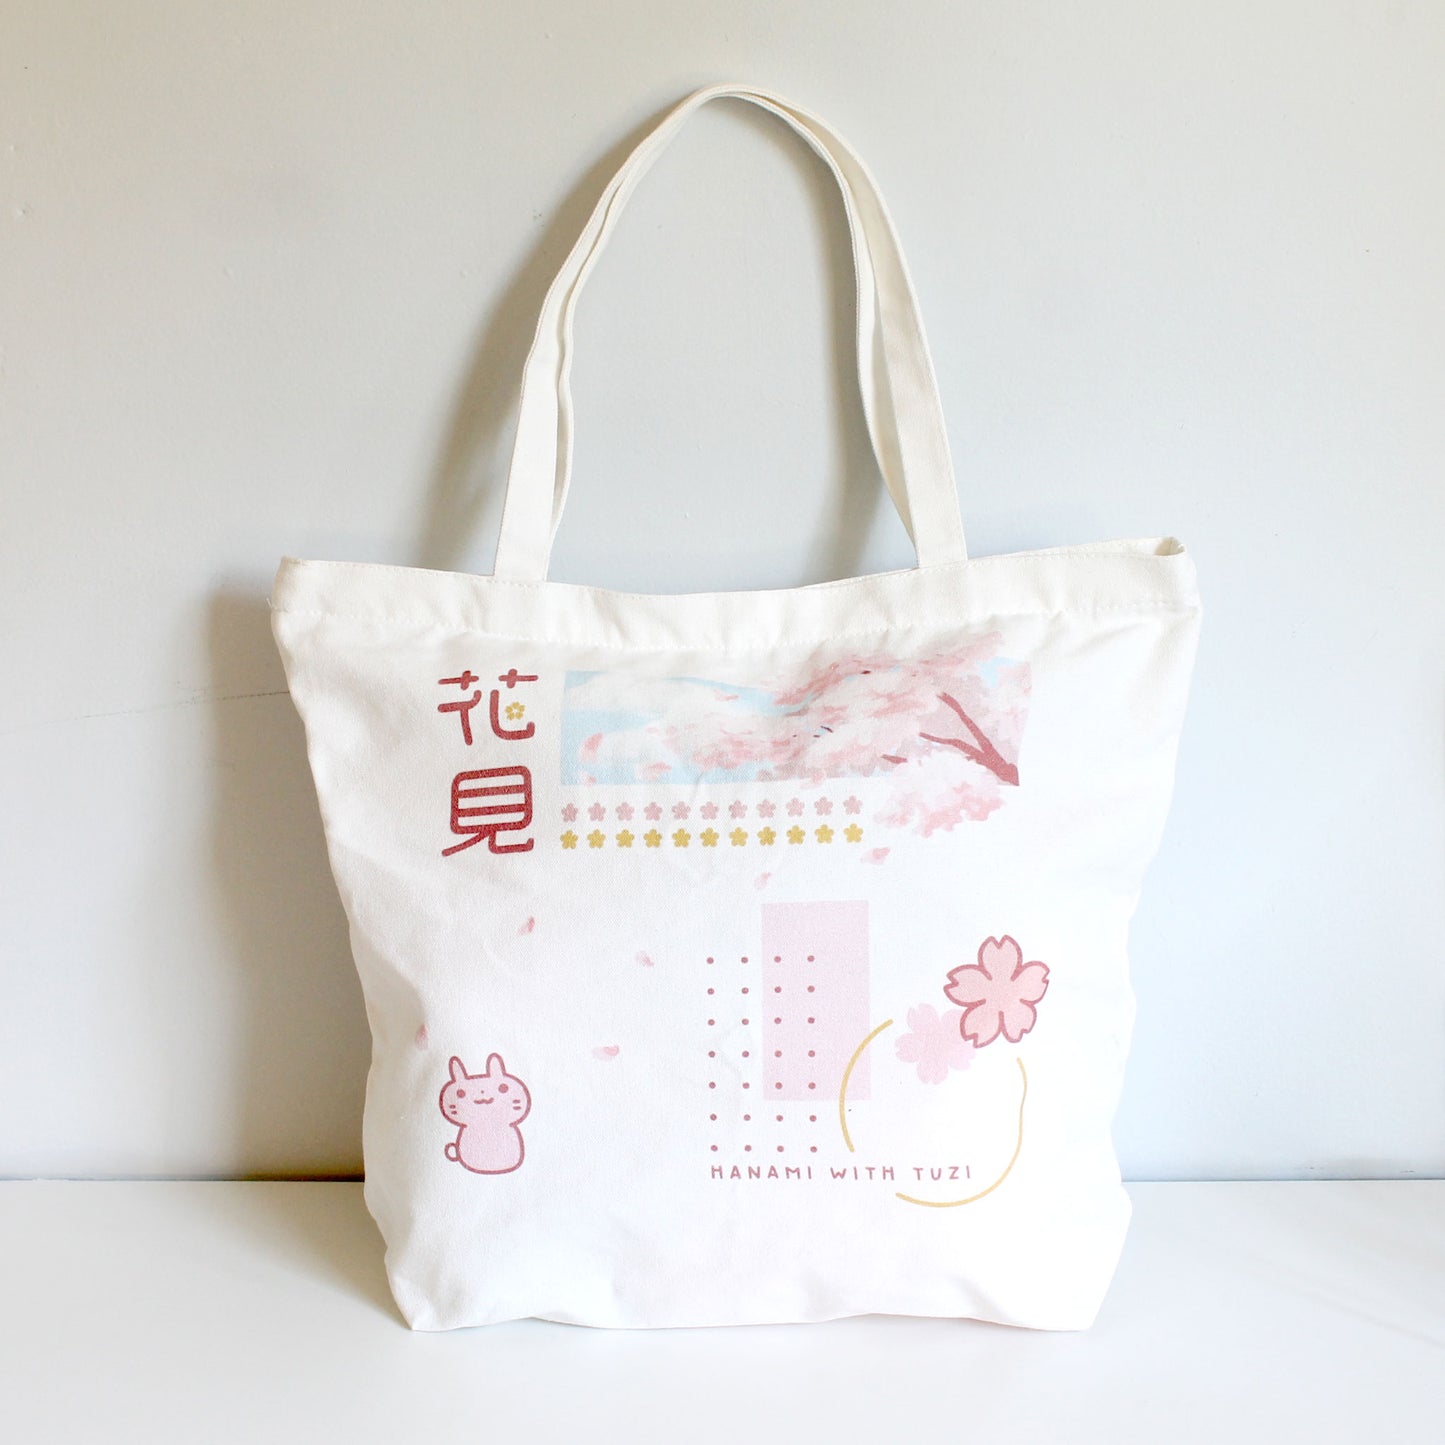 Cherry Blossom "Hanami With Tuzi" Tote Bag With Zipper and Pocket